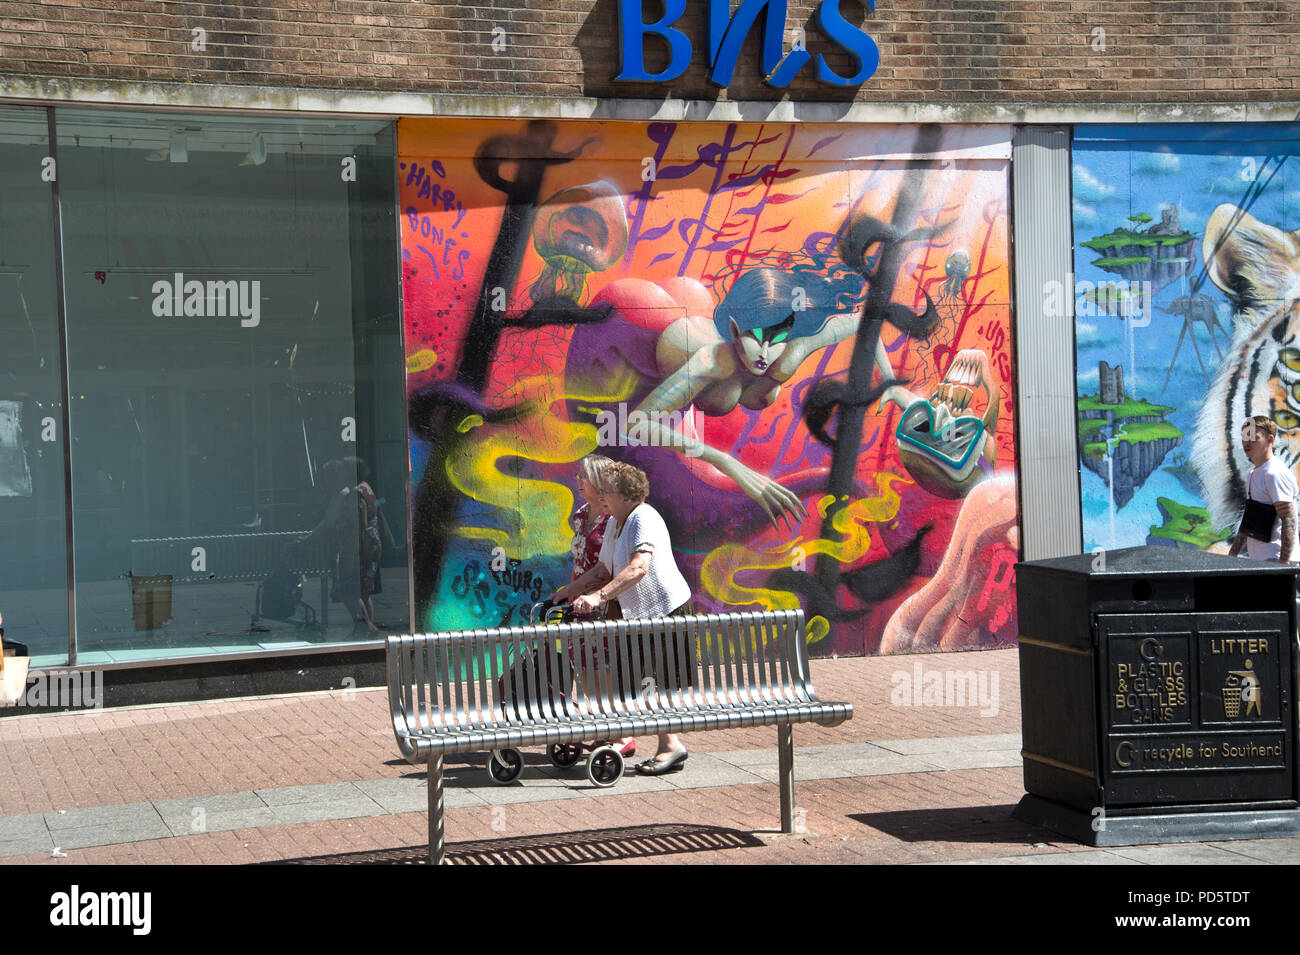 Southend on Sea, Essex. Two older women walk past a closed down BHS (British Home Stores) shop now decorated with colorful street art Stock Photo